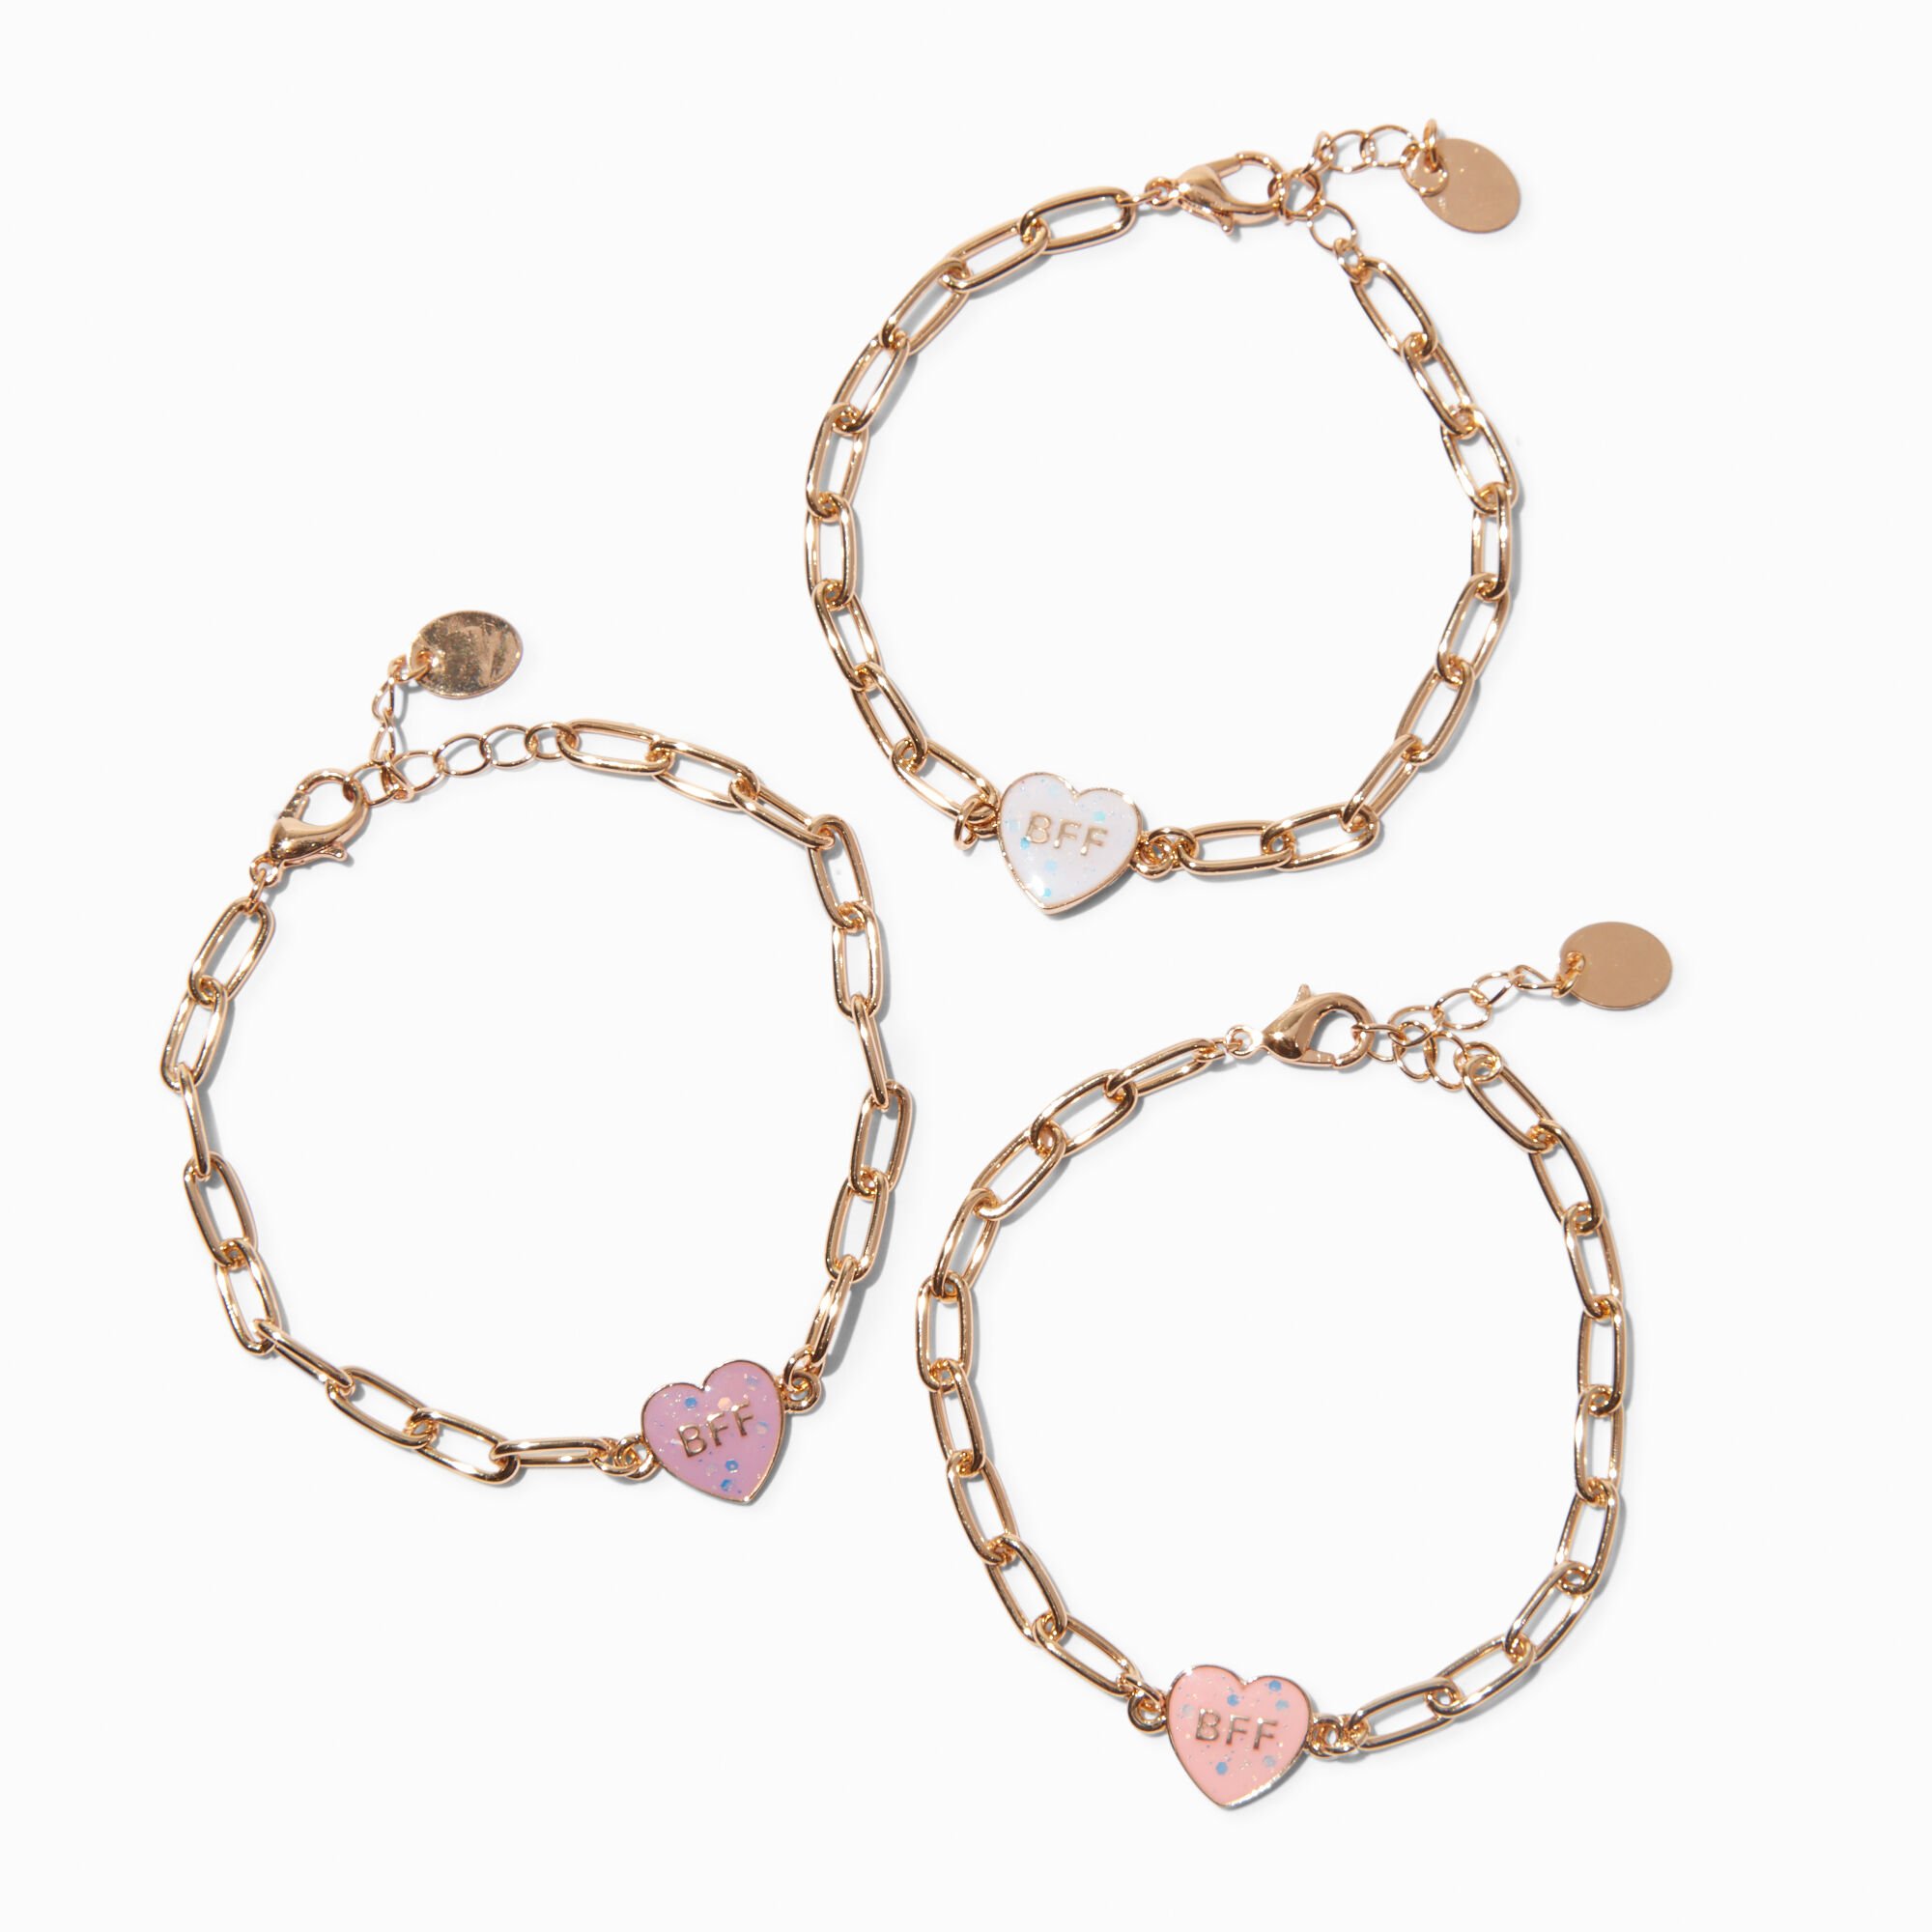 View Claires Best Friends Heart Bff Uv ColorChanging Charm Bracelets 3 Pack Gold information